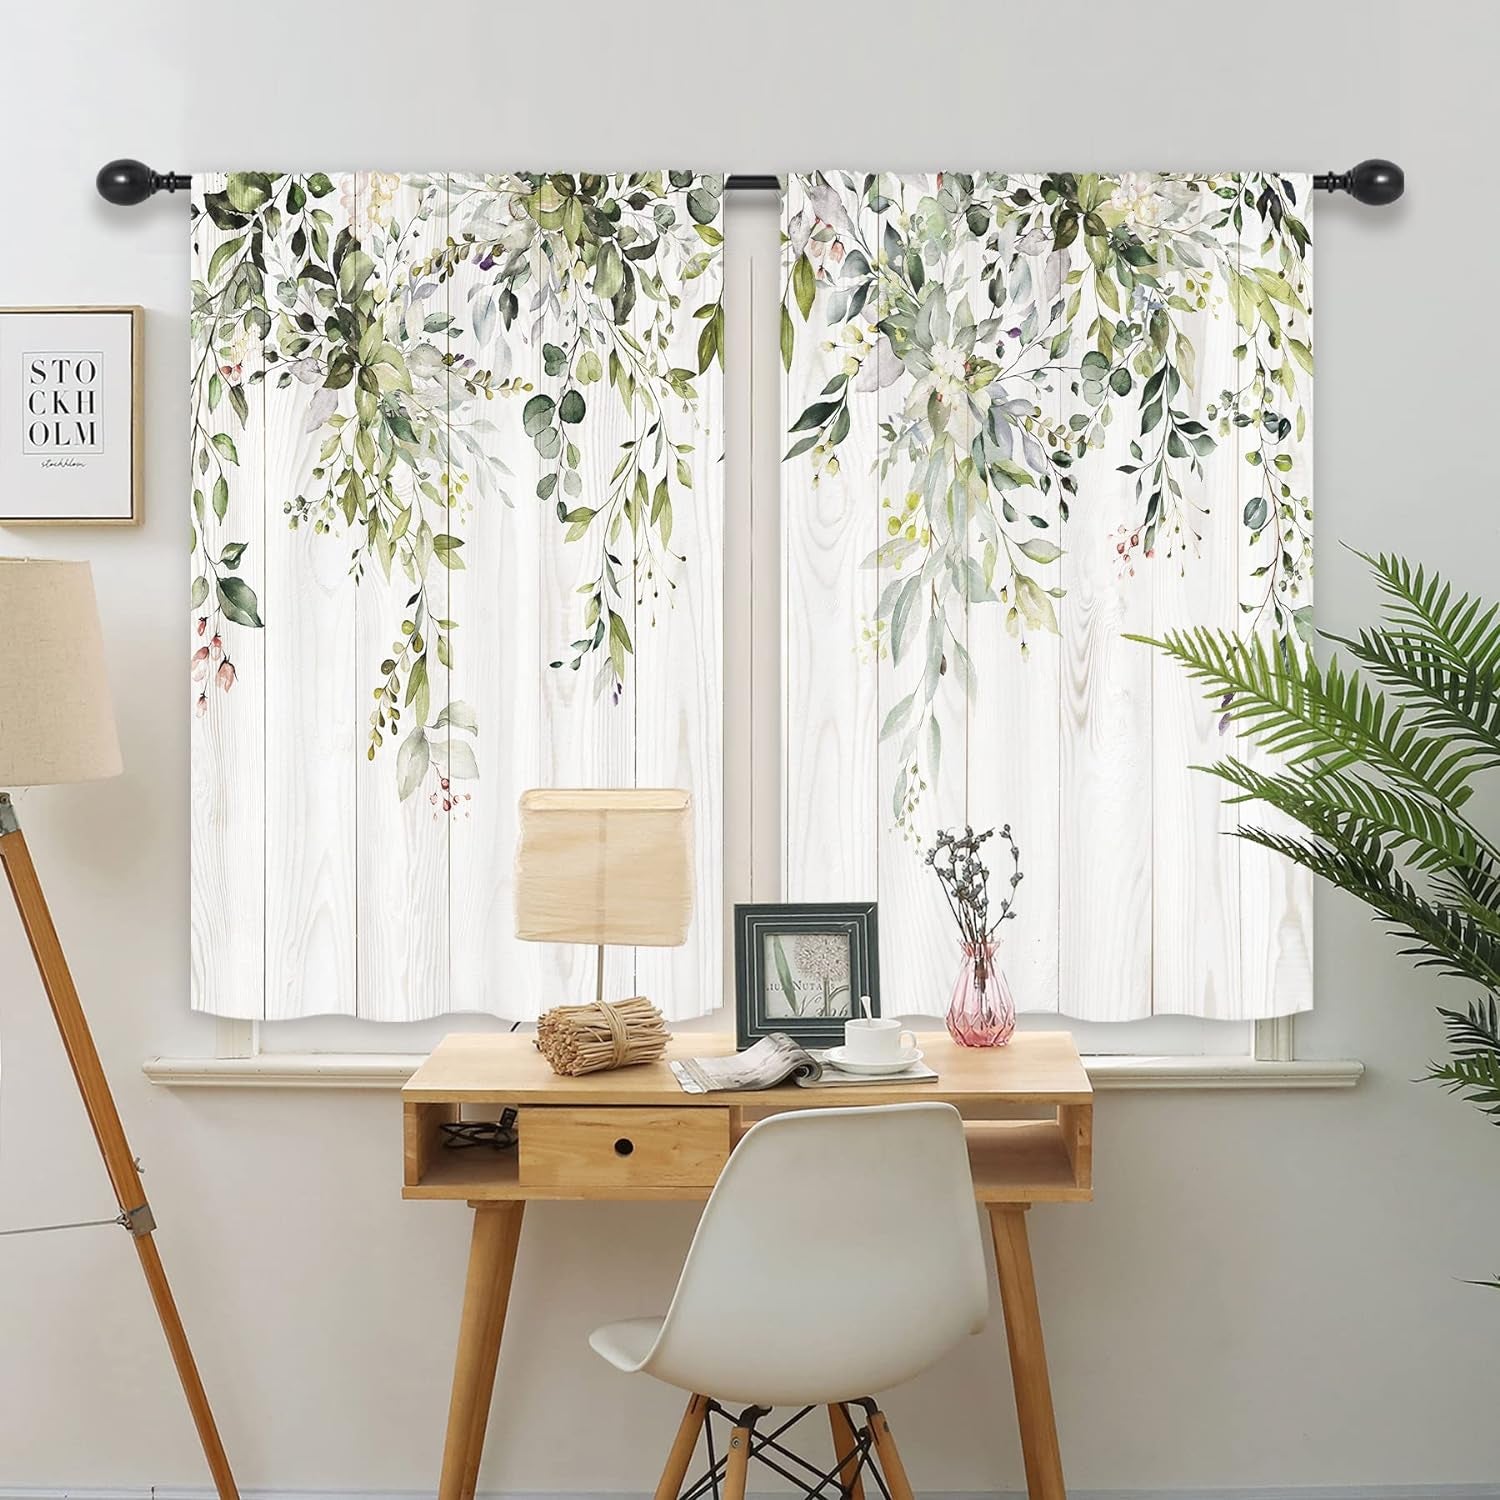 Riyidecor Sage Green Eucalyptus Leaves Kitchen Window Curtains over Sink Flower Floral Spring Botanical Rod Pocket Plant Cafe Curtains for Bathroom Living Room Drapes Treatment Fabric 27.5 X 39 Inch  Pan na   